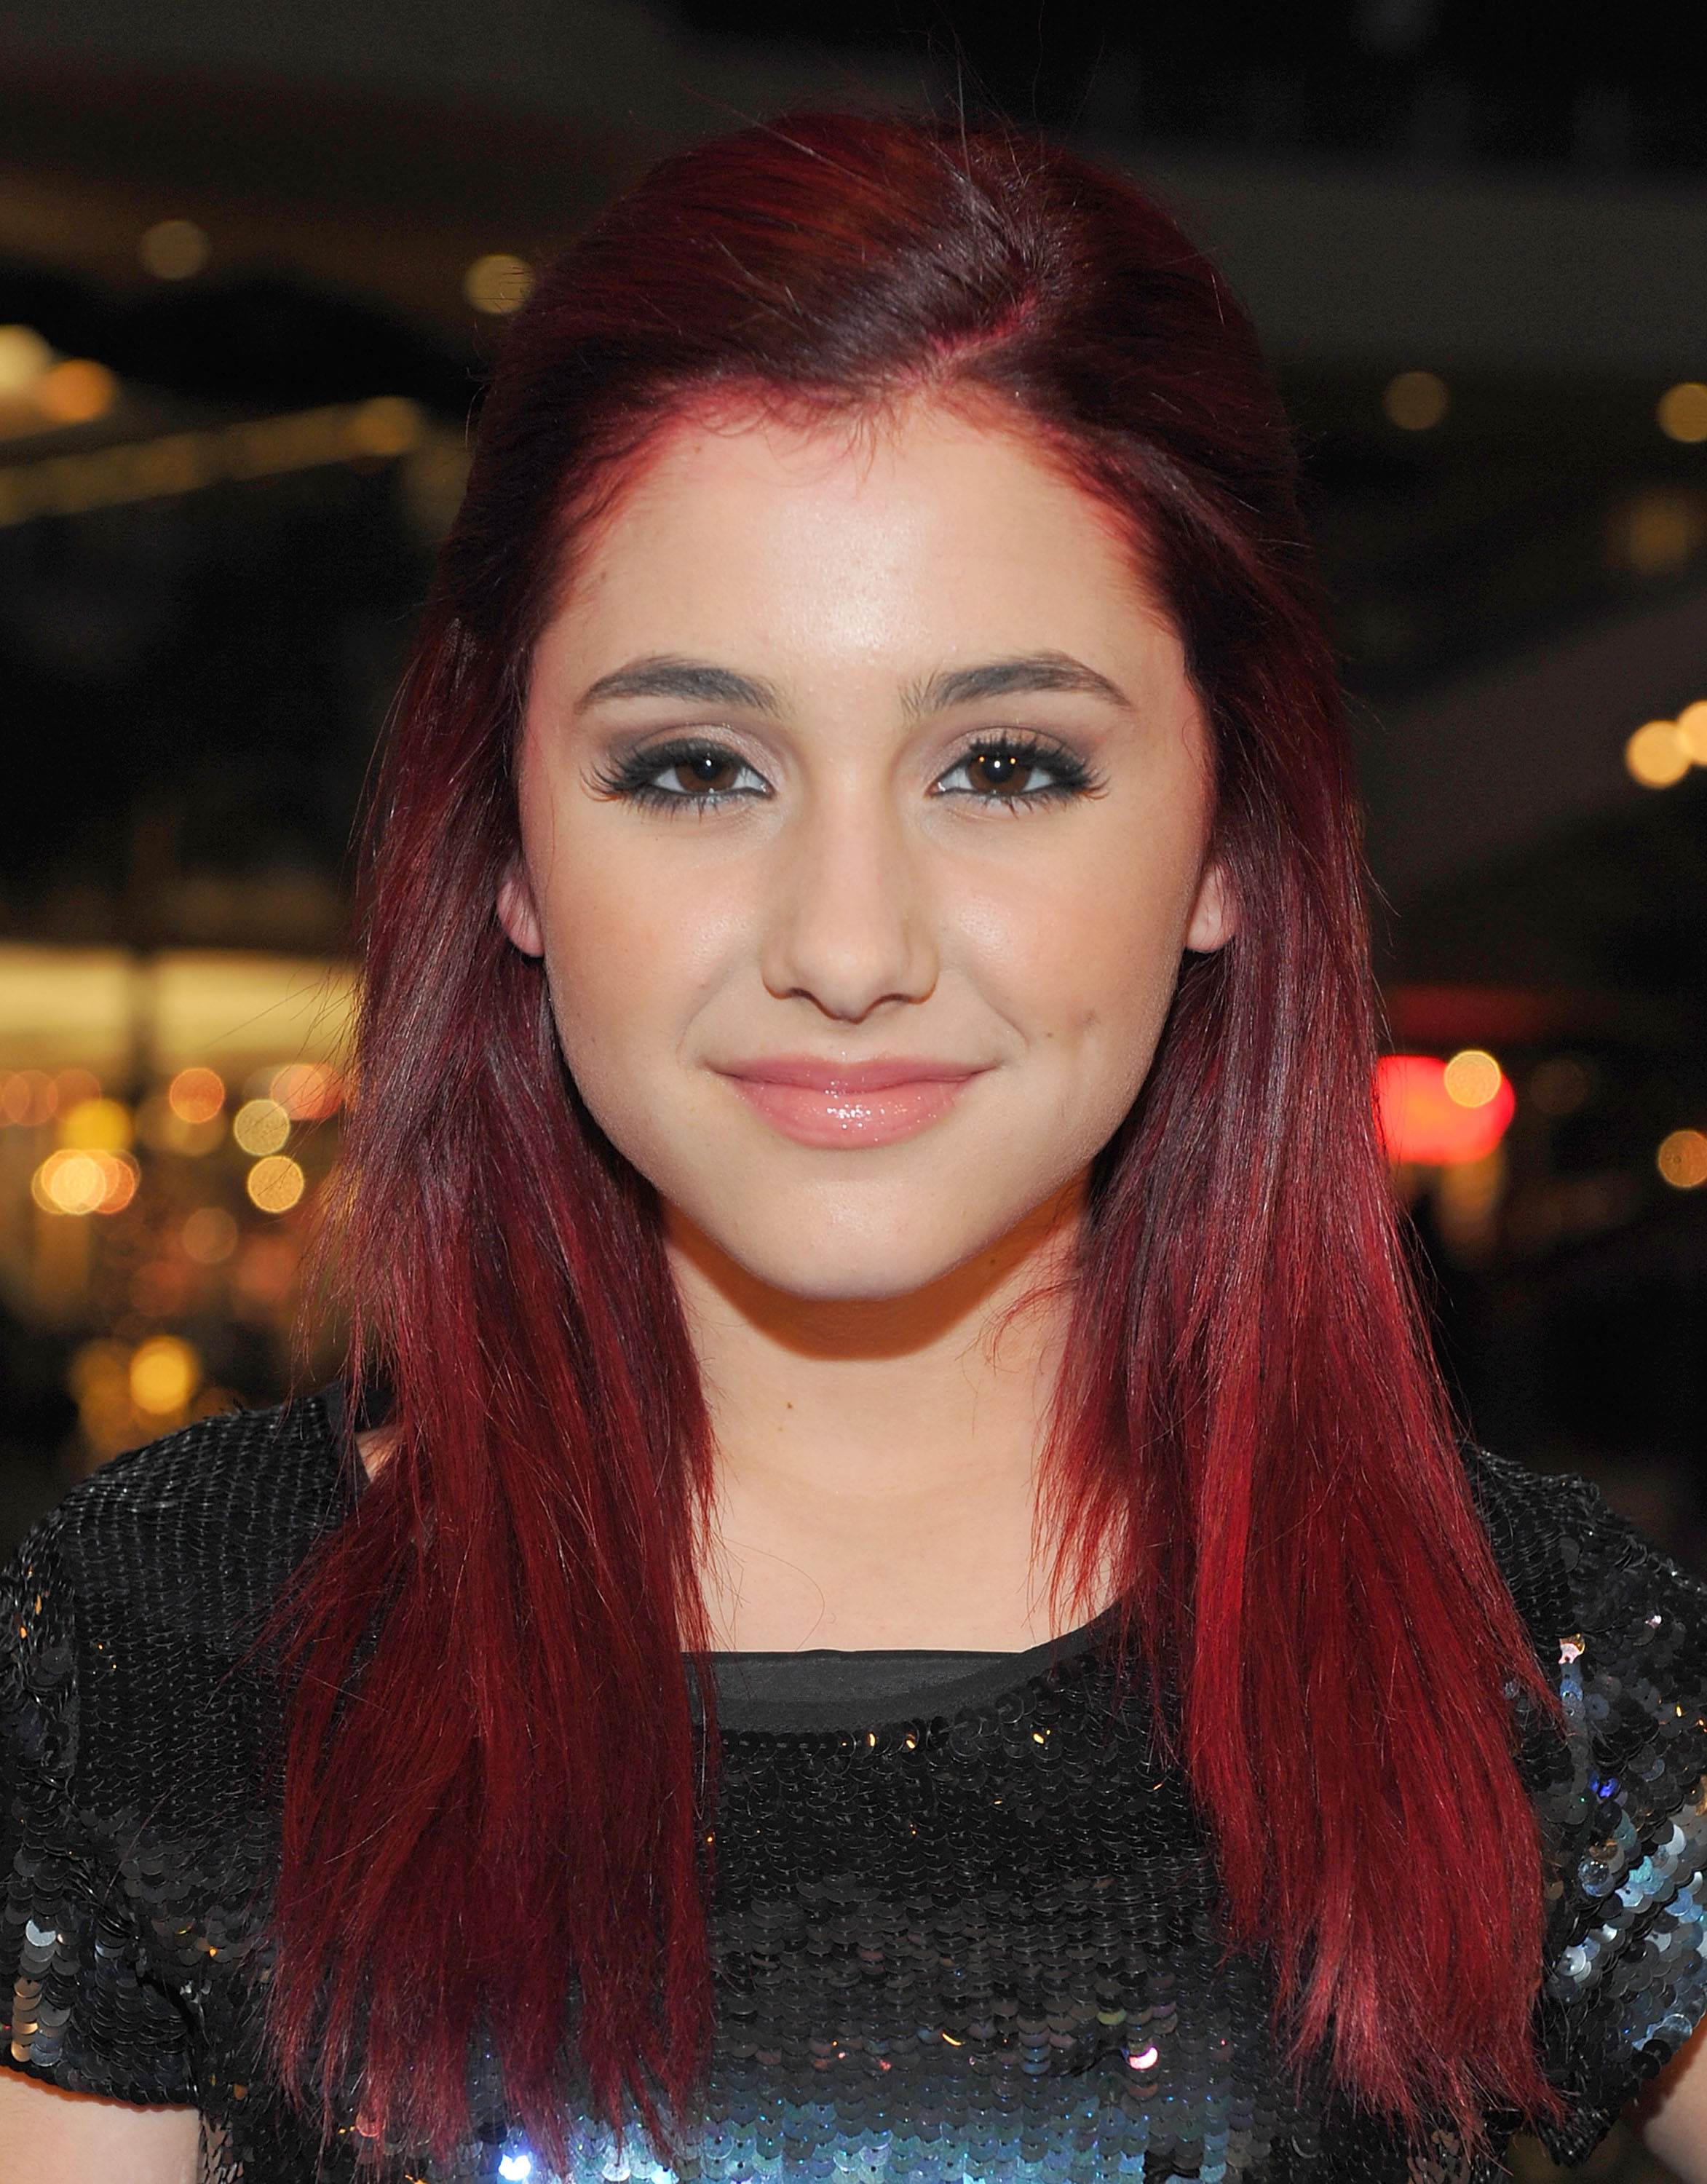 Ariana Grande at Hollywood & Highland Center and One Heartland's "Holiday of Hope" tree lighting celebration on November 28, 2009 in Hollywood, California. | Source: Getty Images